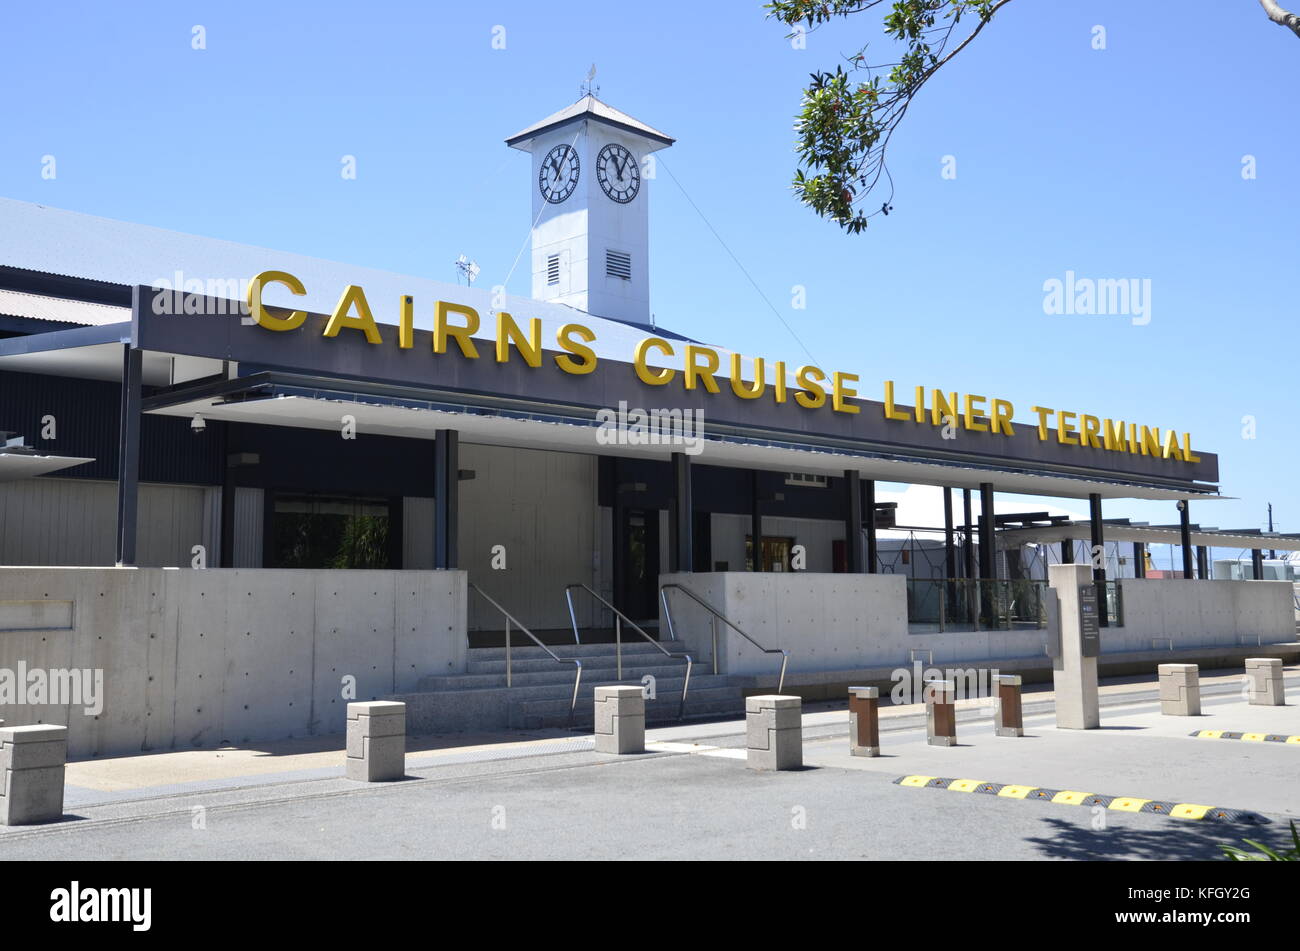 Cairns Cruise Liner terminal on Trinity Inlet in northern Queensland, Australia Stock Photo